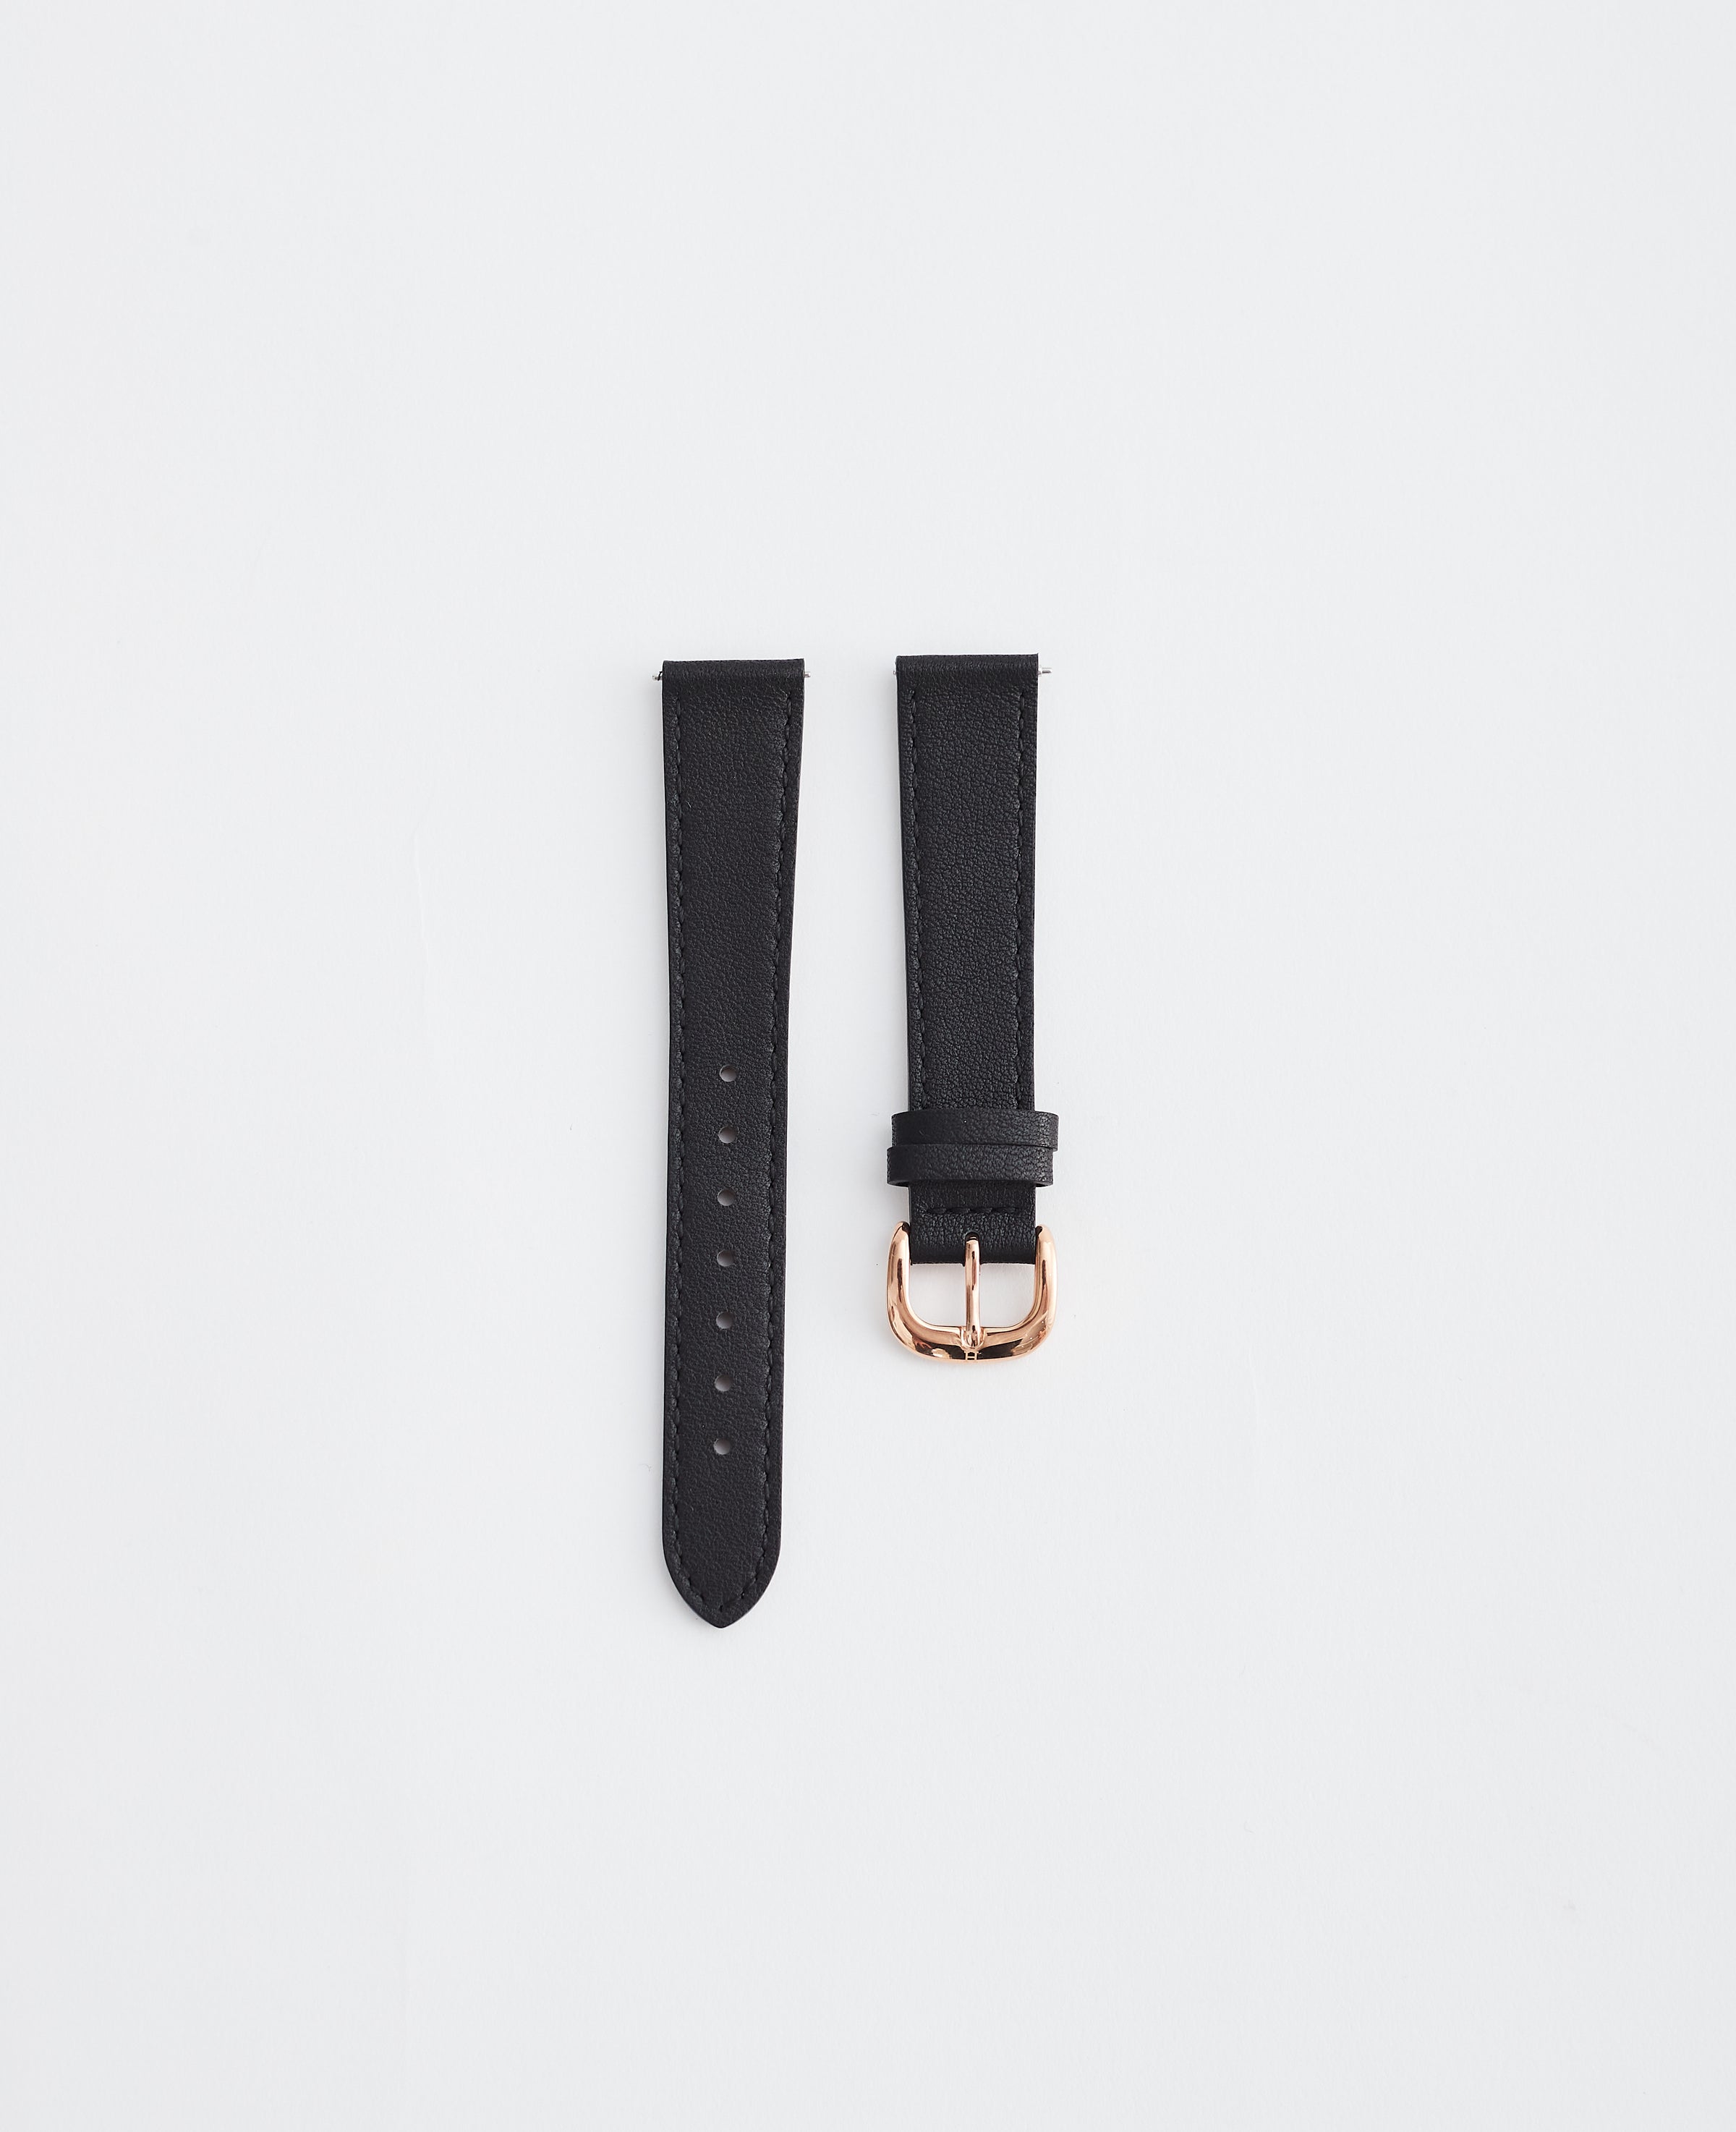 16mm Classic Leather Watch Strap in Black / Rose Gold by The Horse®